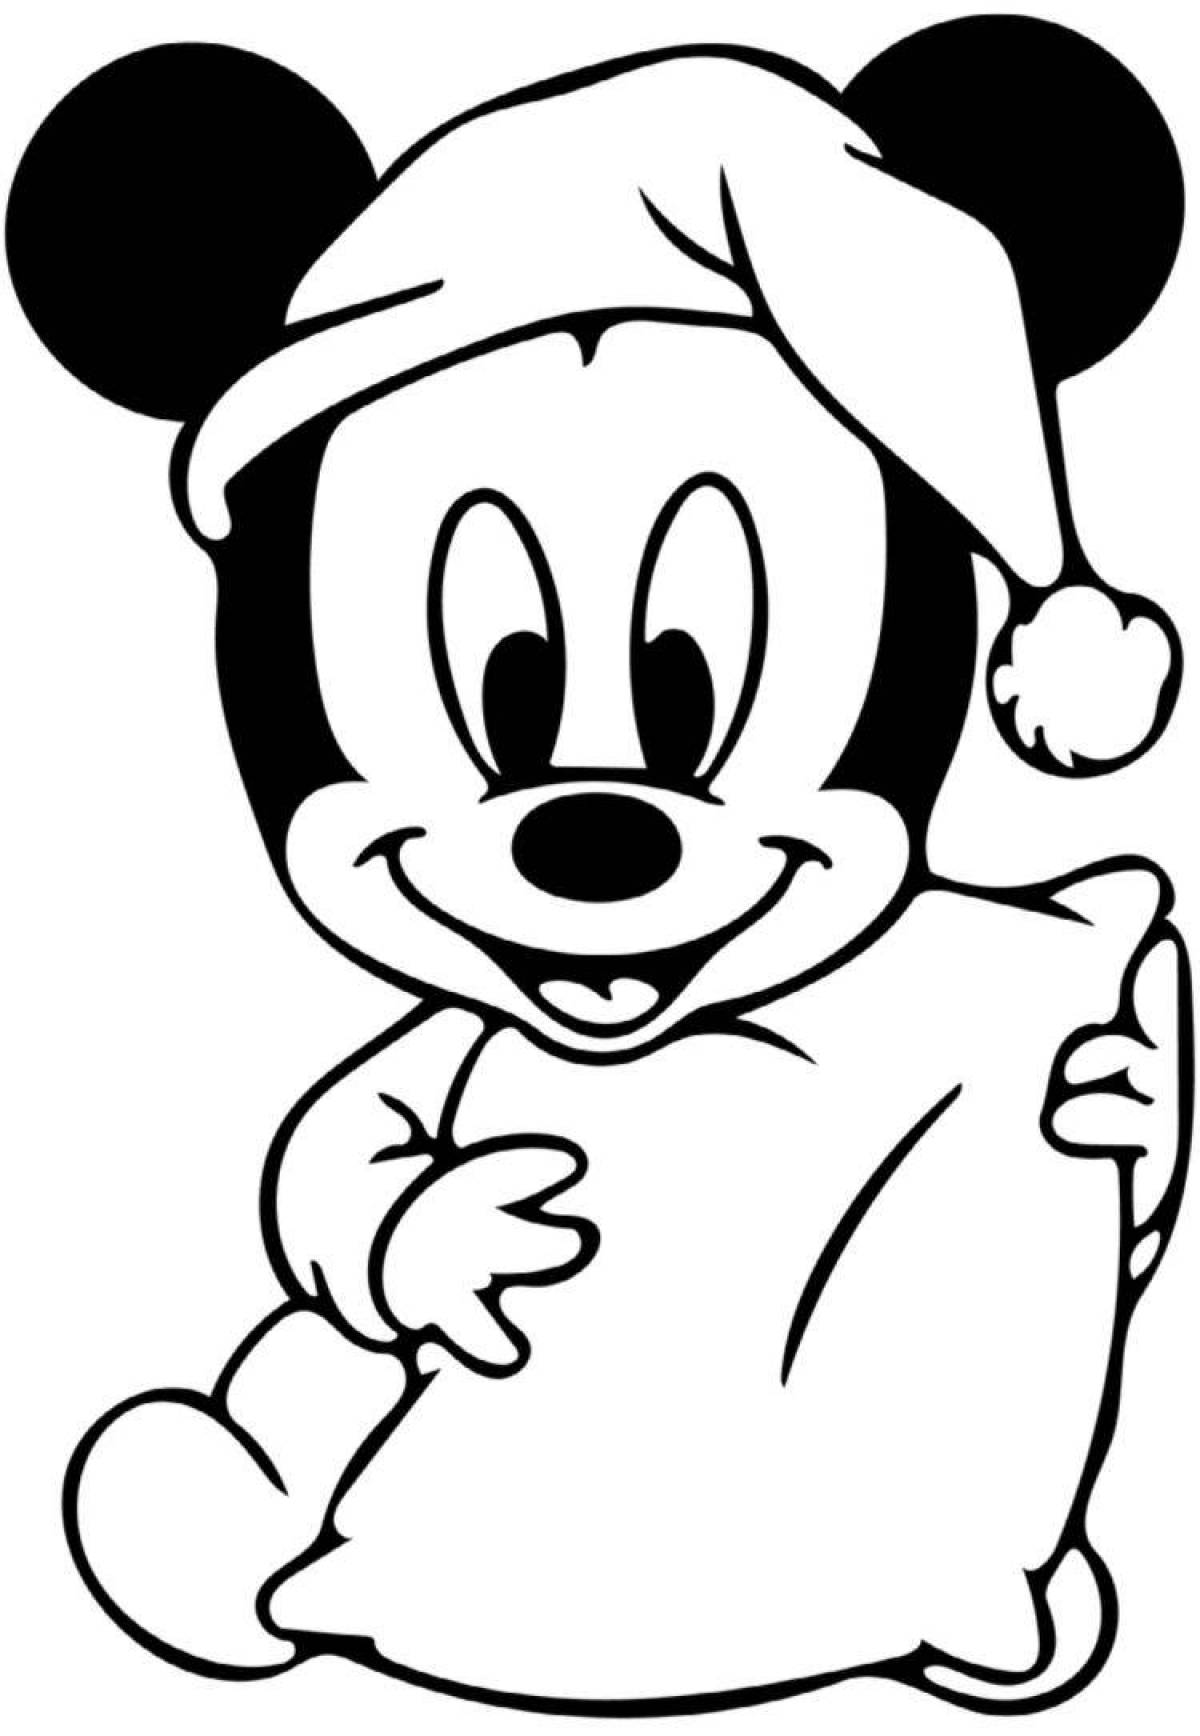 Outstanding disney character coloring pages